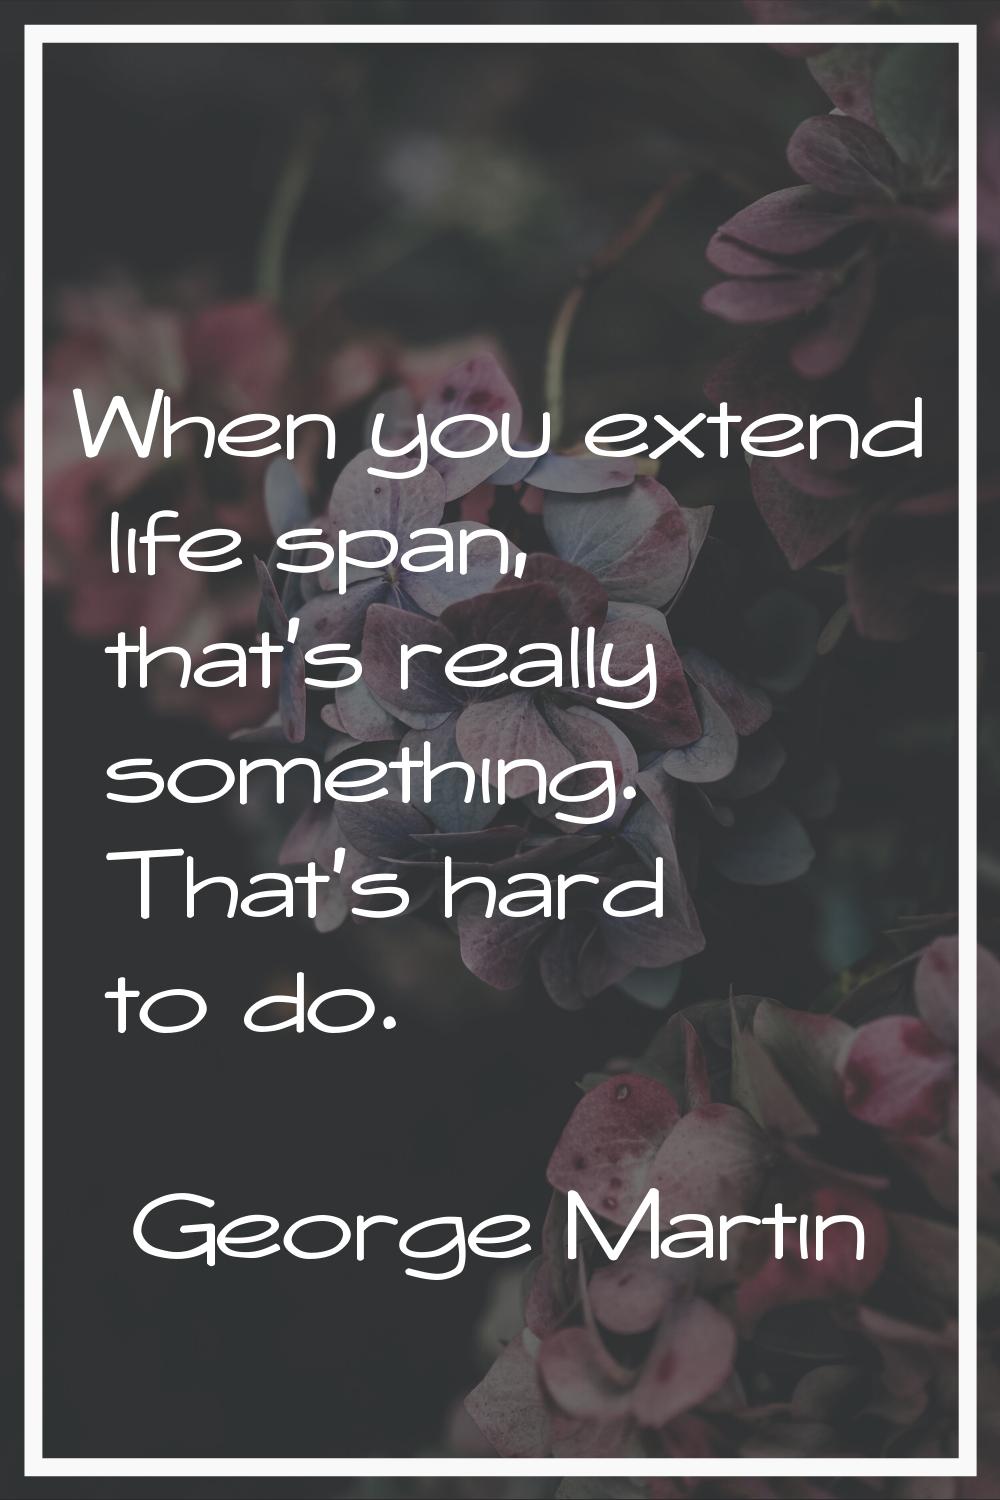 When you extend life span, that's really something. That's hard to do.